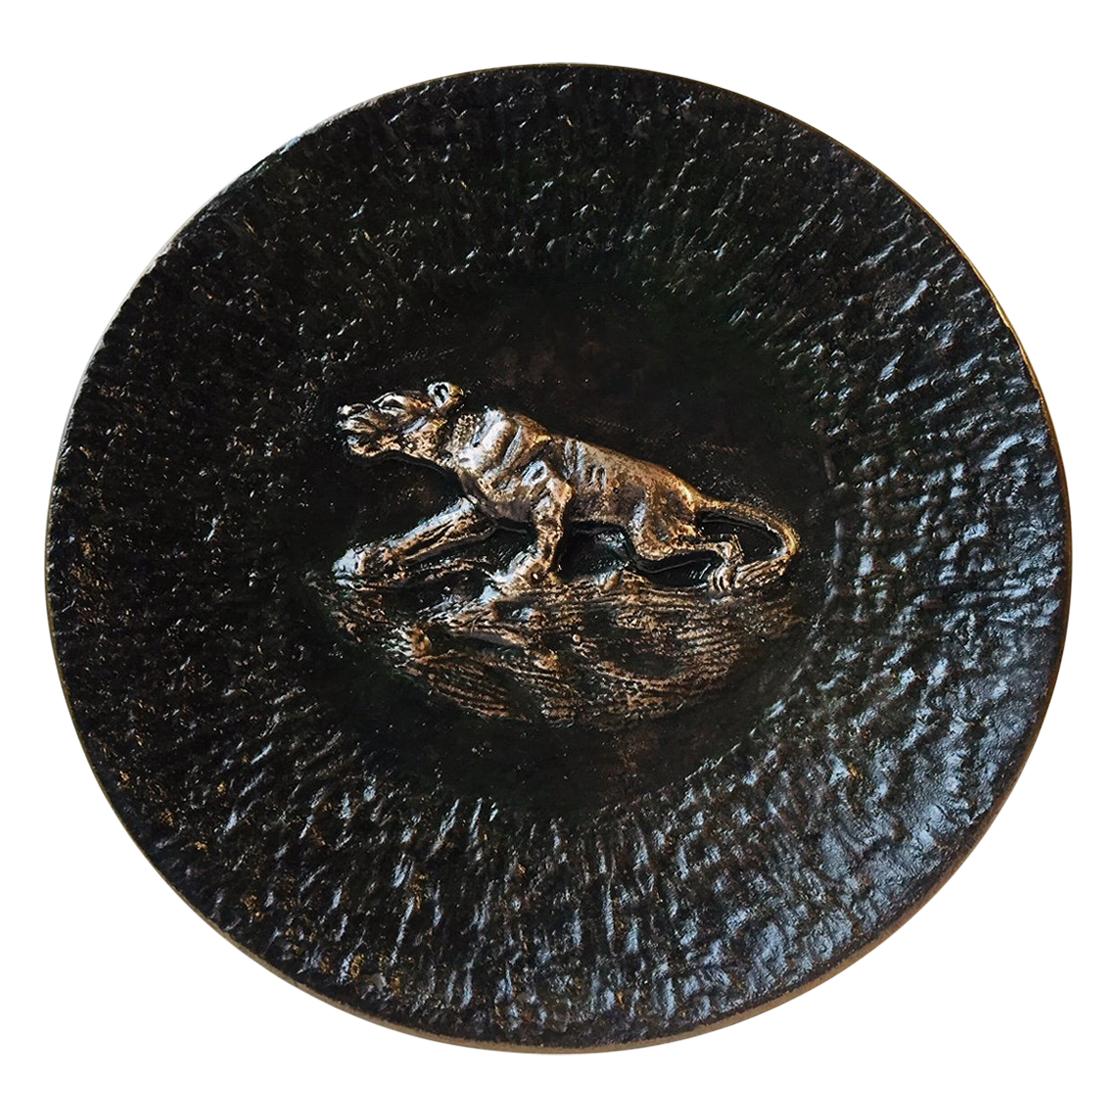 Japanese Bronze Bowl with Tiger Motif in Relief, 1920s